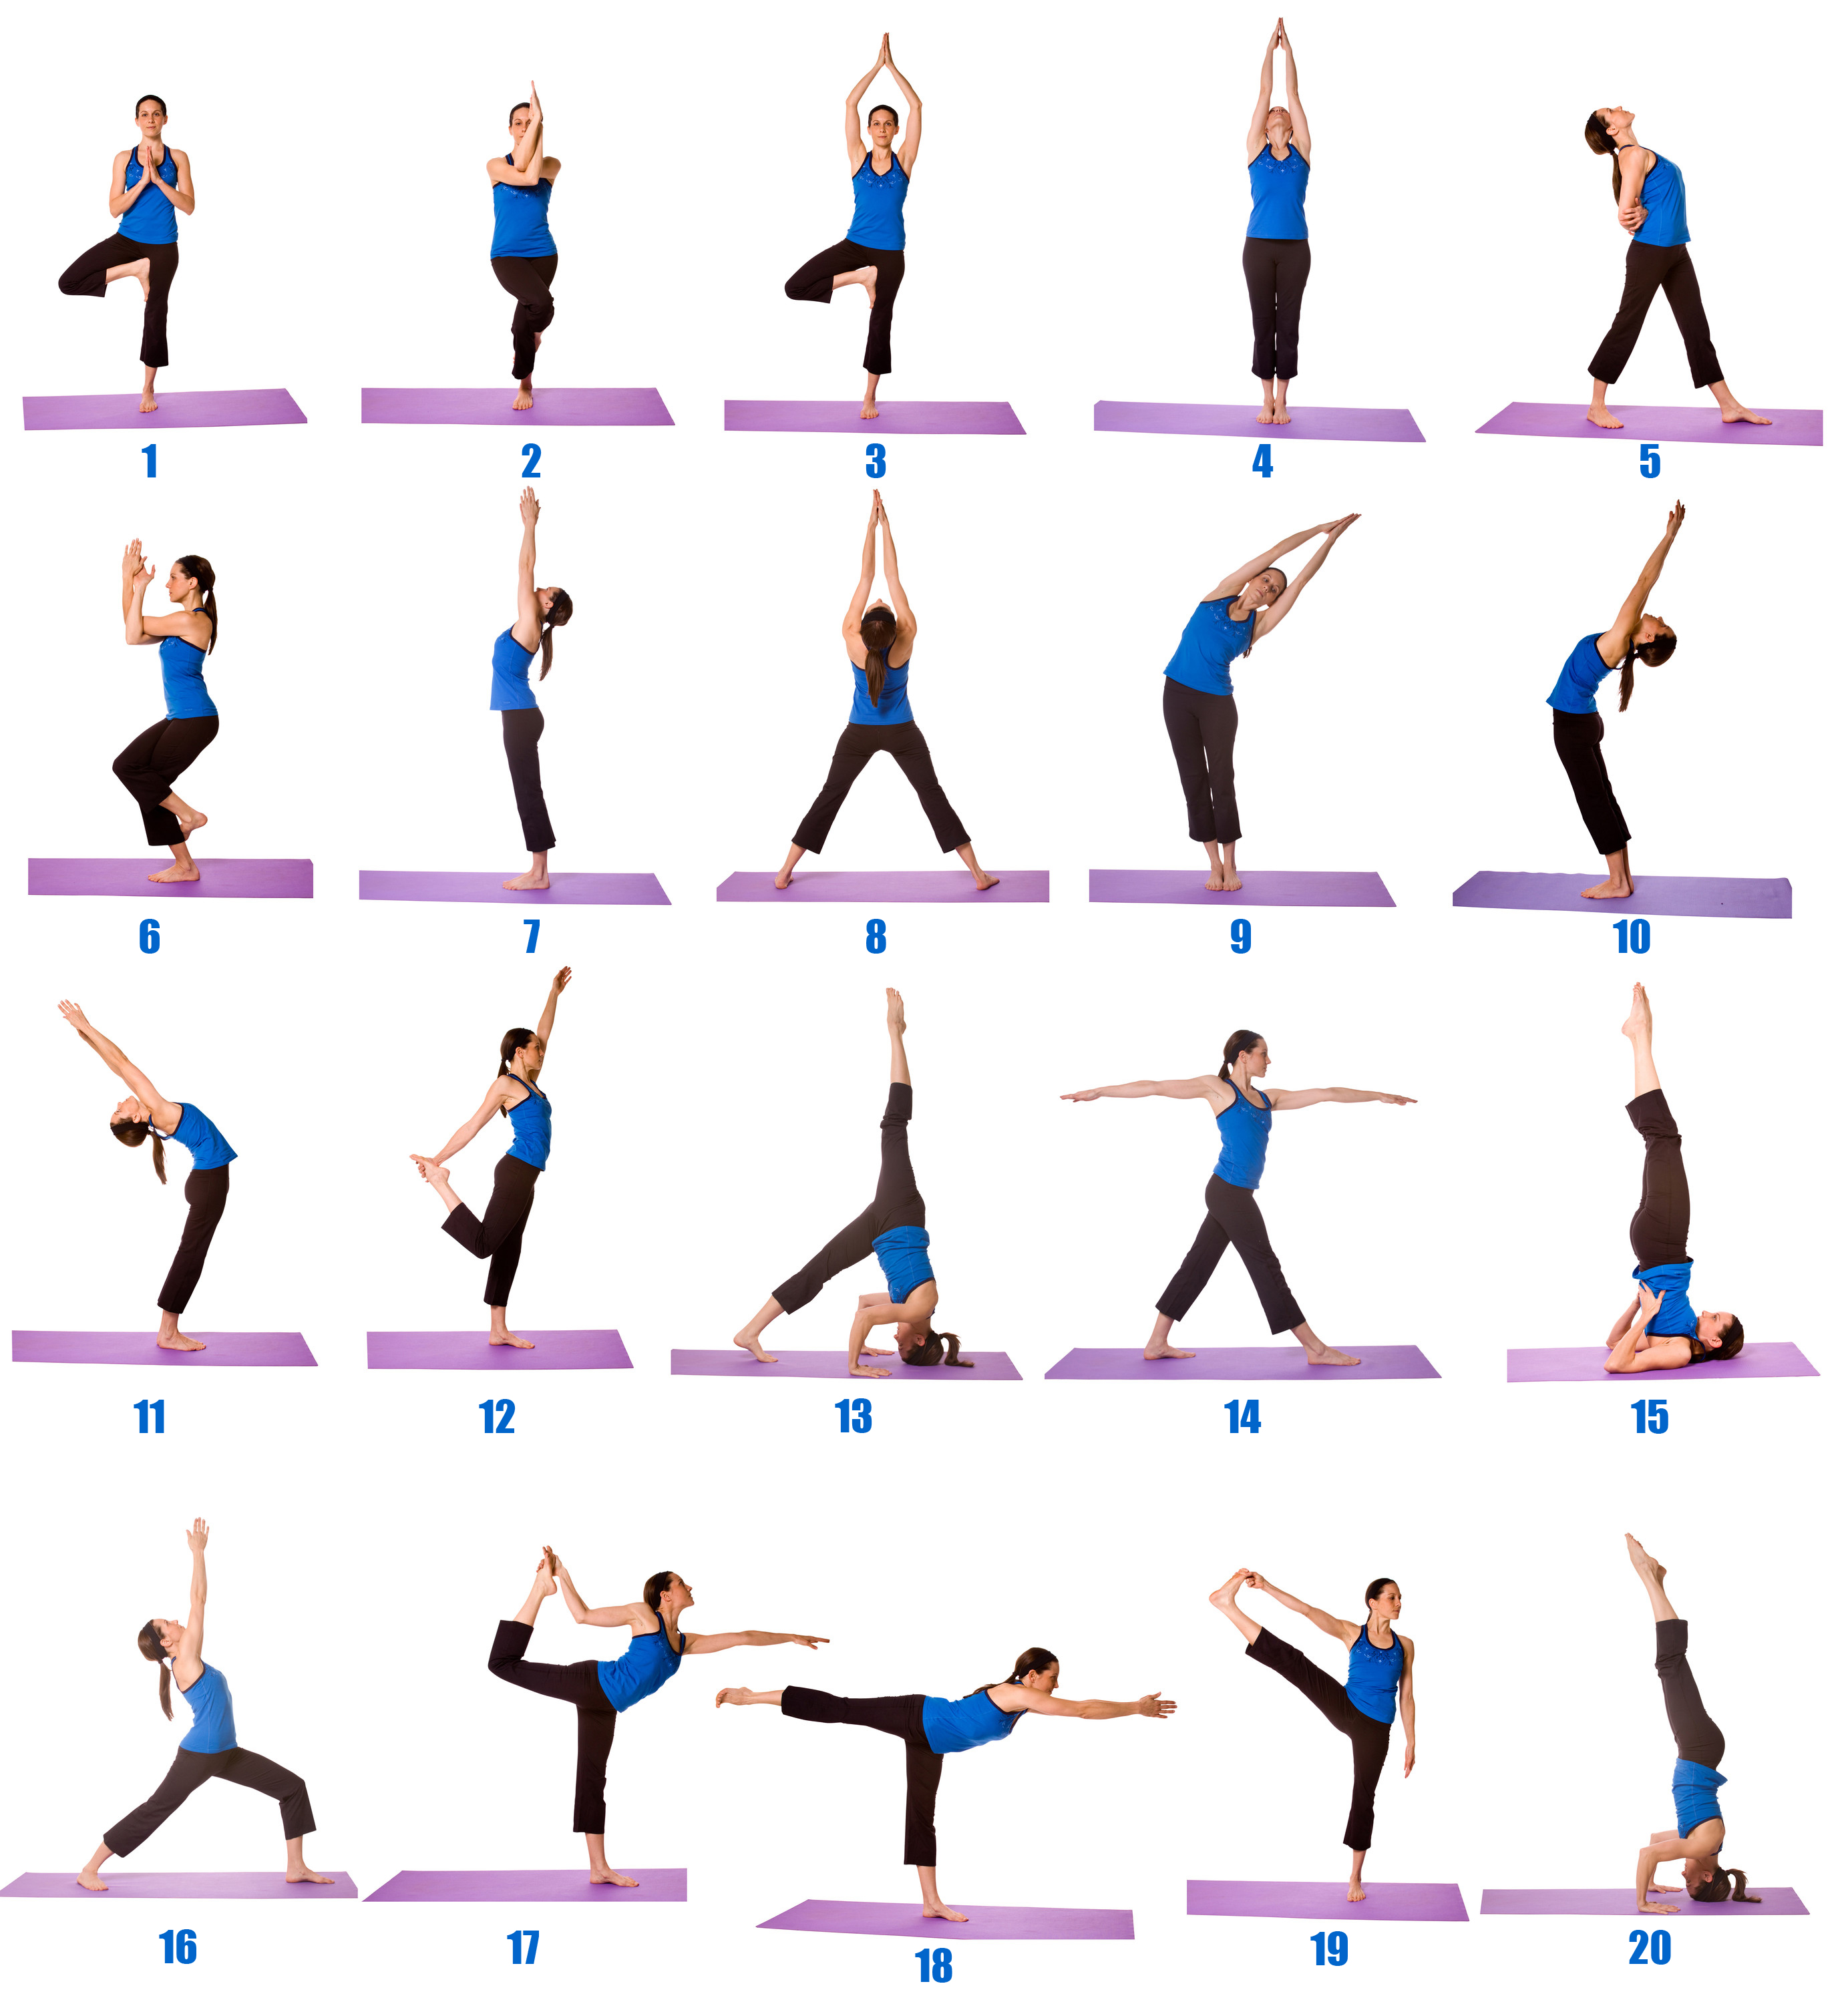 http://www.fitnessgymyoga.com/wp-content/uploads/2016/04/easy-yoga-poses-for-beginners-with-pictures.jpg